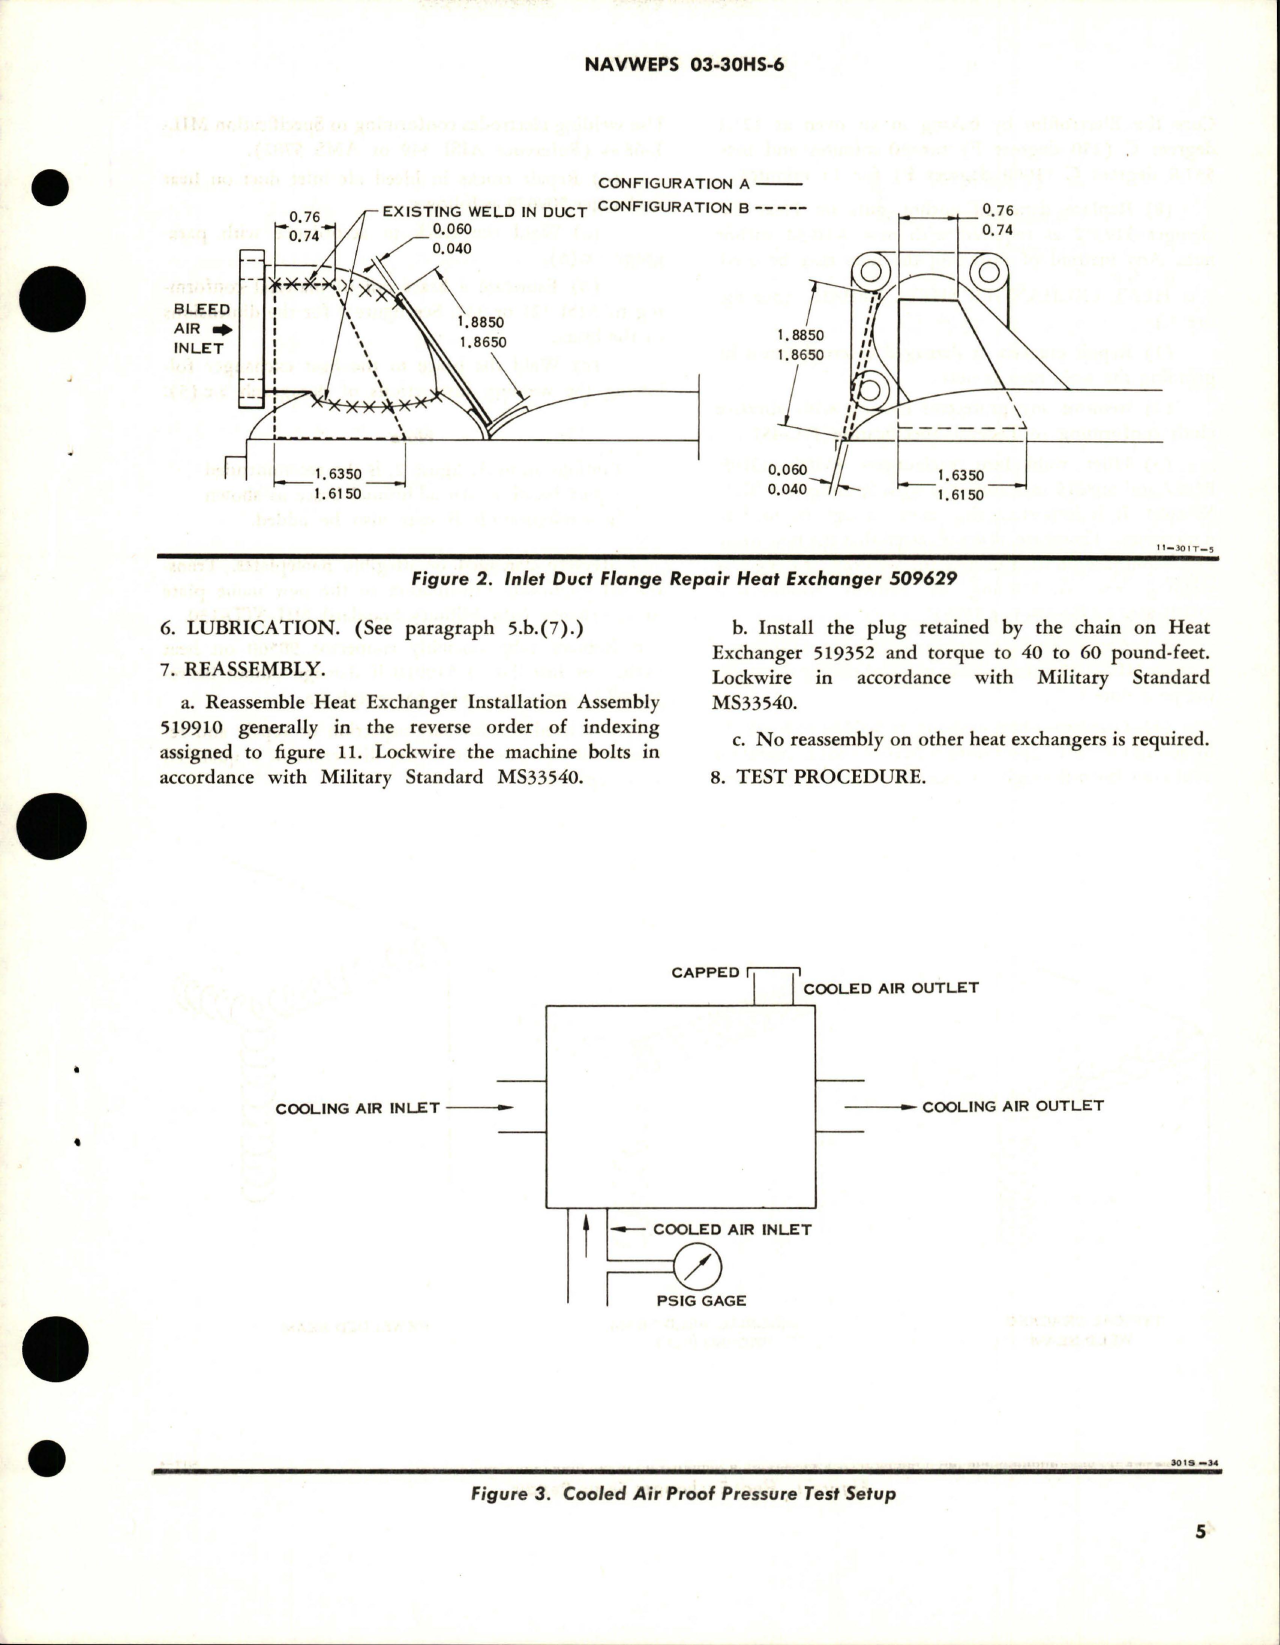 Sample page 7 from AirCorps Library document: Overhaul Instructions with Parts Breakdown for Heat Exchanger and Heat Exchanger Installation